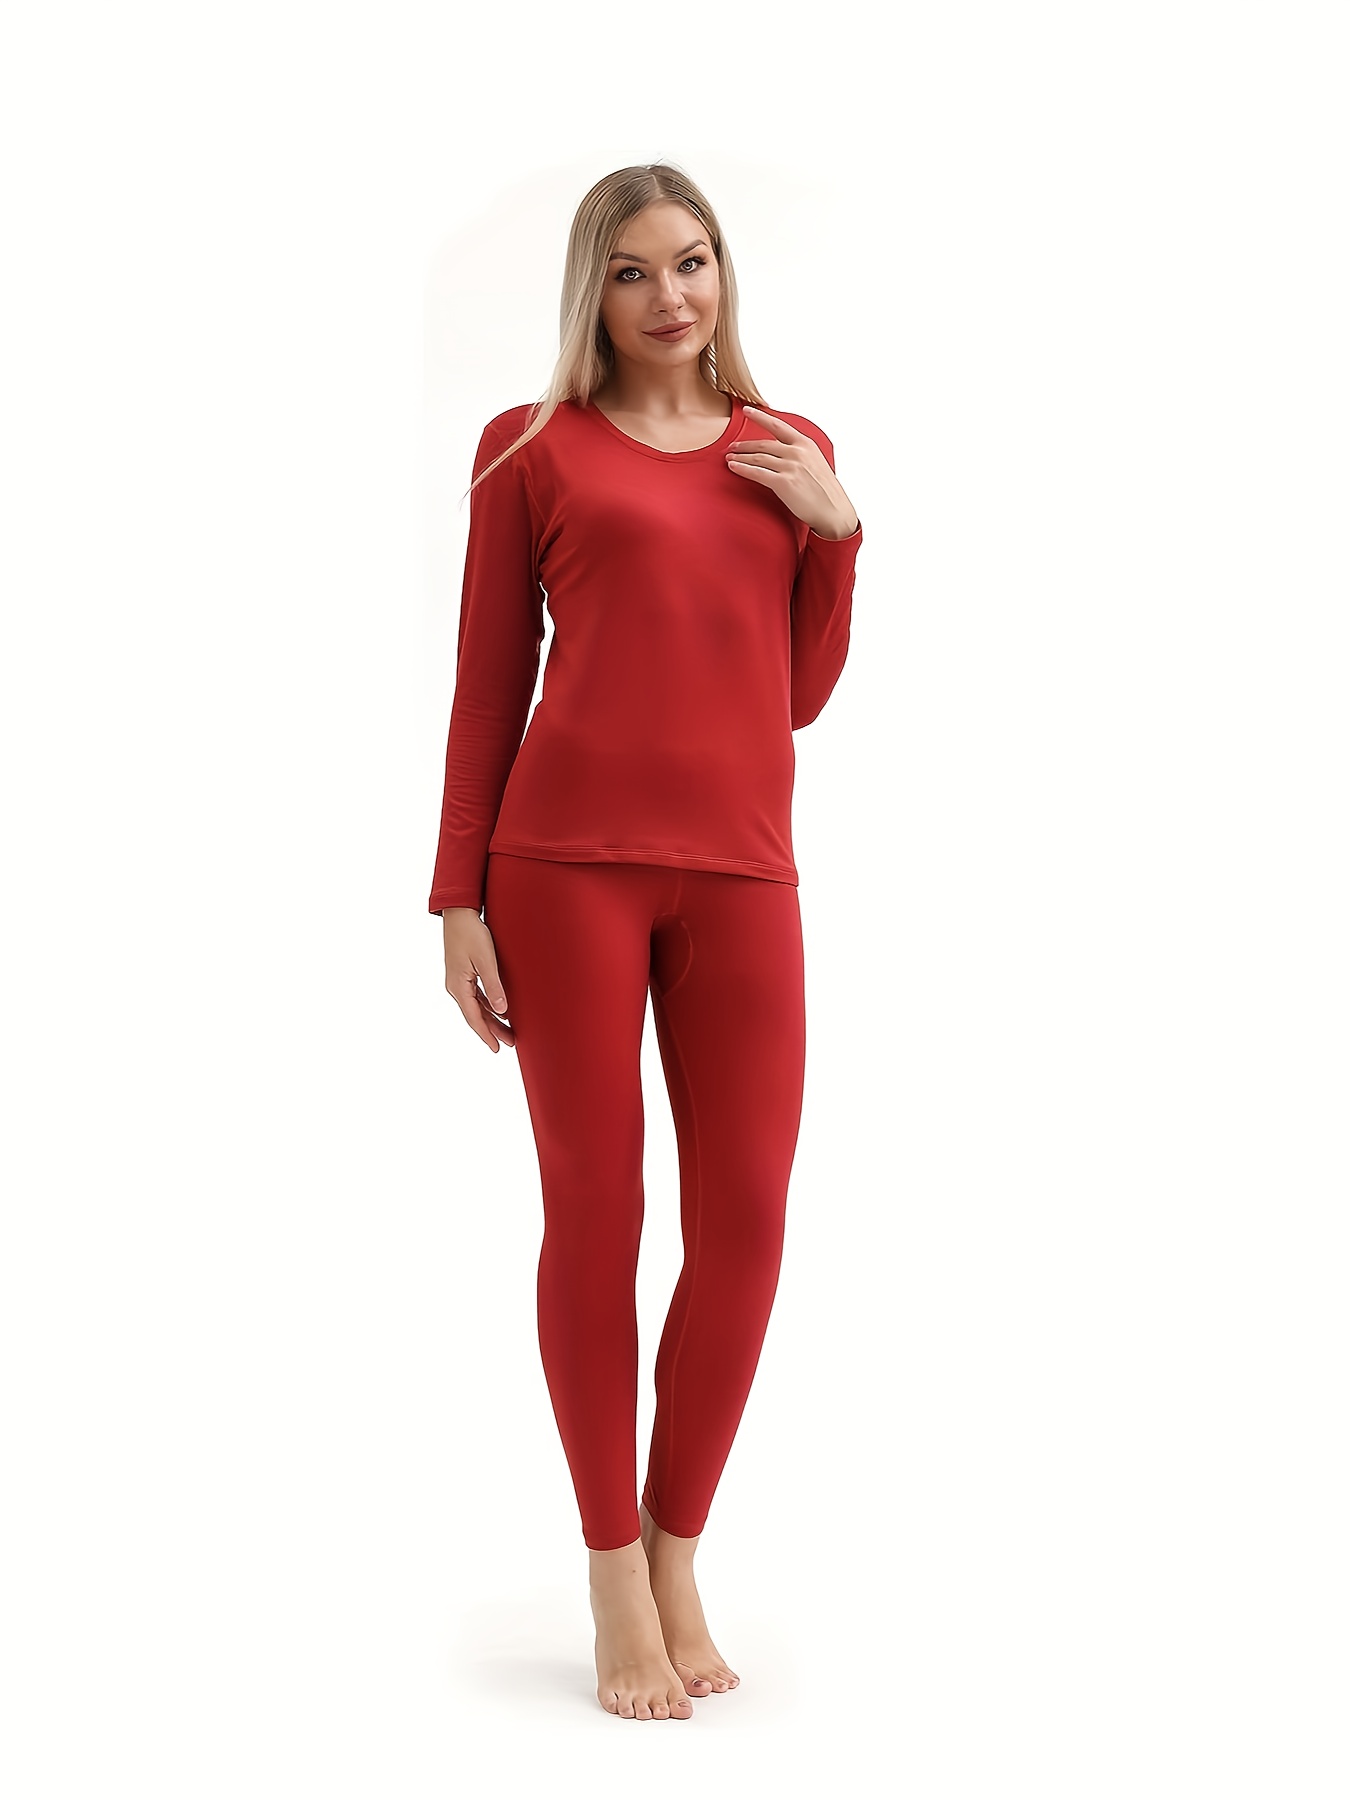 Warm Womens Thermal Set Long Johns & Pants For Winter Skiing, With Soft  Velvet And Double Faced Plush Design From Diao04, $19.8